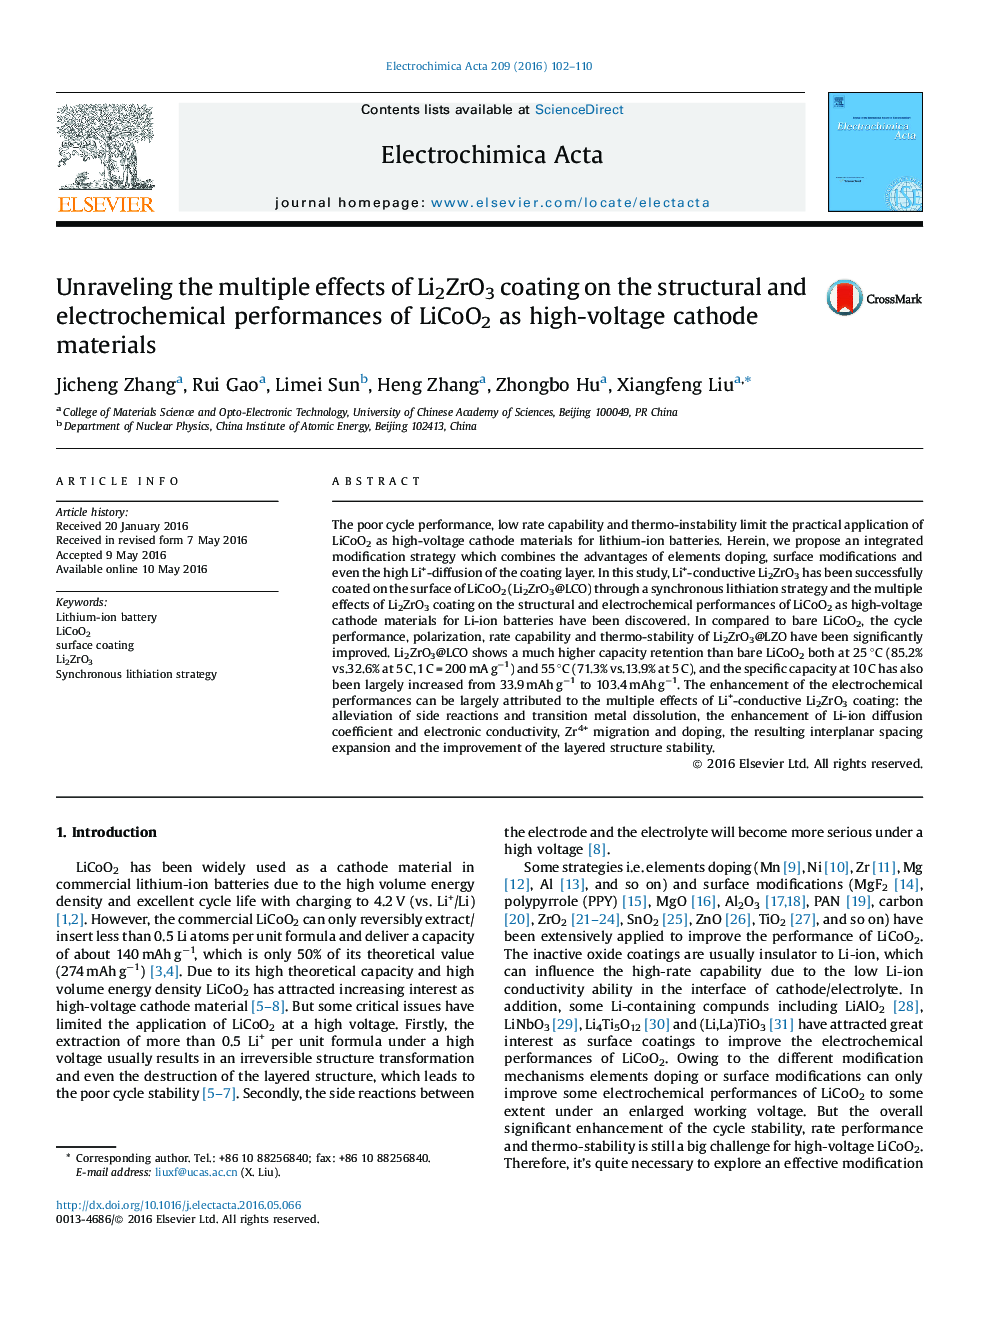 Unraveling the multiple effects of Li2ZrO3 coating on the structural and electrochemical performances of LiCoO2 as high-voltage cathode materials